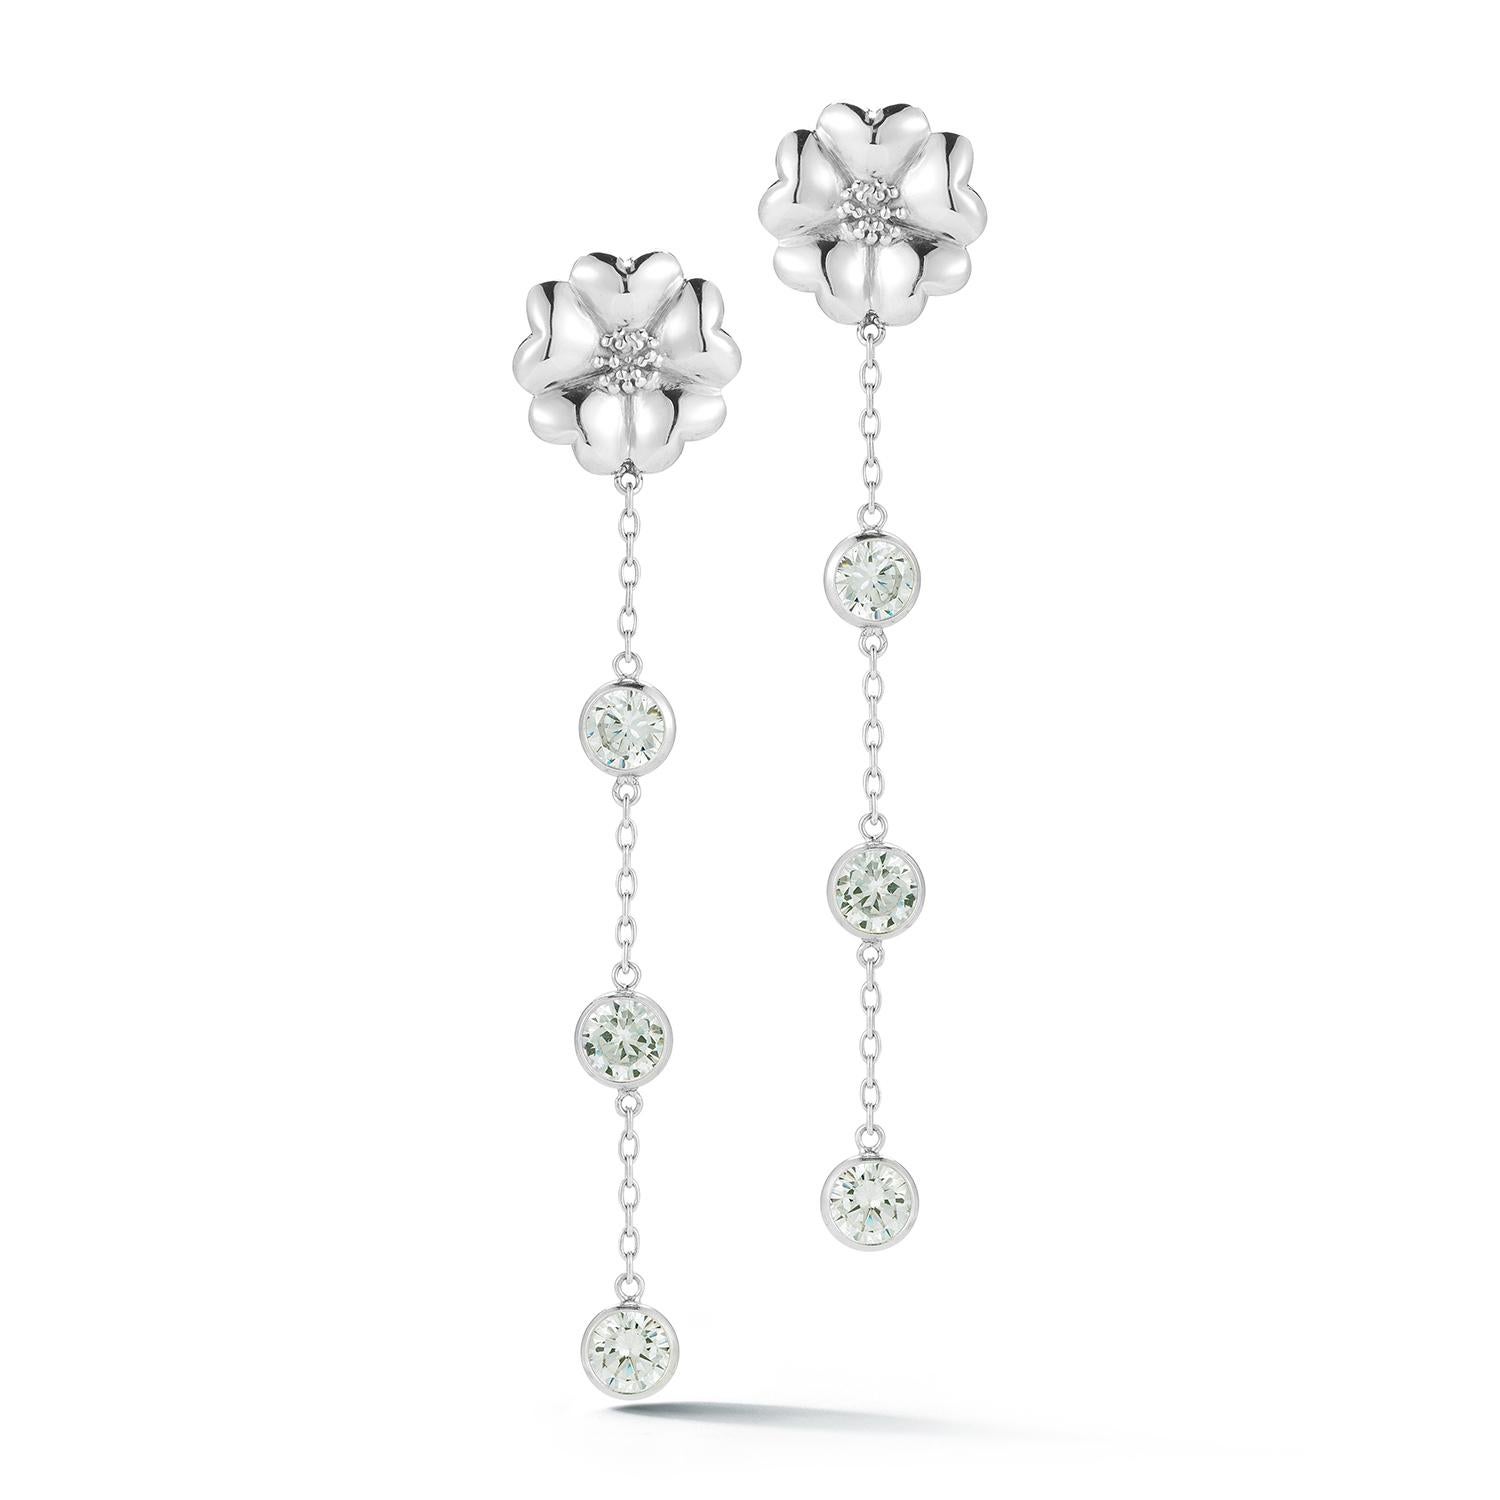 Designed in NYC

.925 Sterling Silver 6 x 6 mm White Topaz Triple Stone Drop Blossom Earrings. No matter the season, allow natural beauty to surround you wherever you go. Triple stone drop blossom earrings: 

Sterling silver 
High-polish